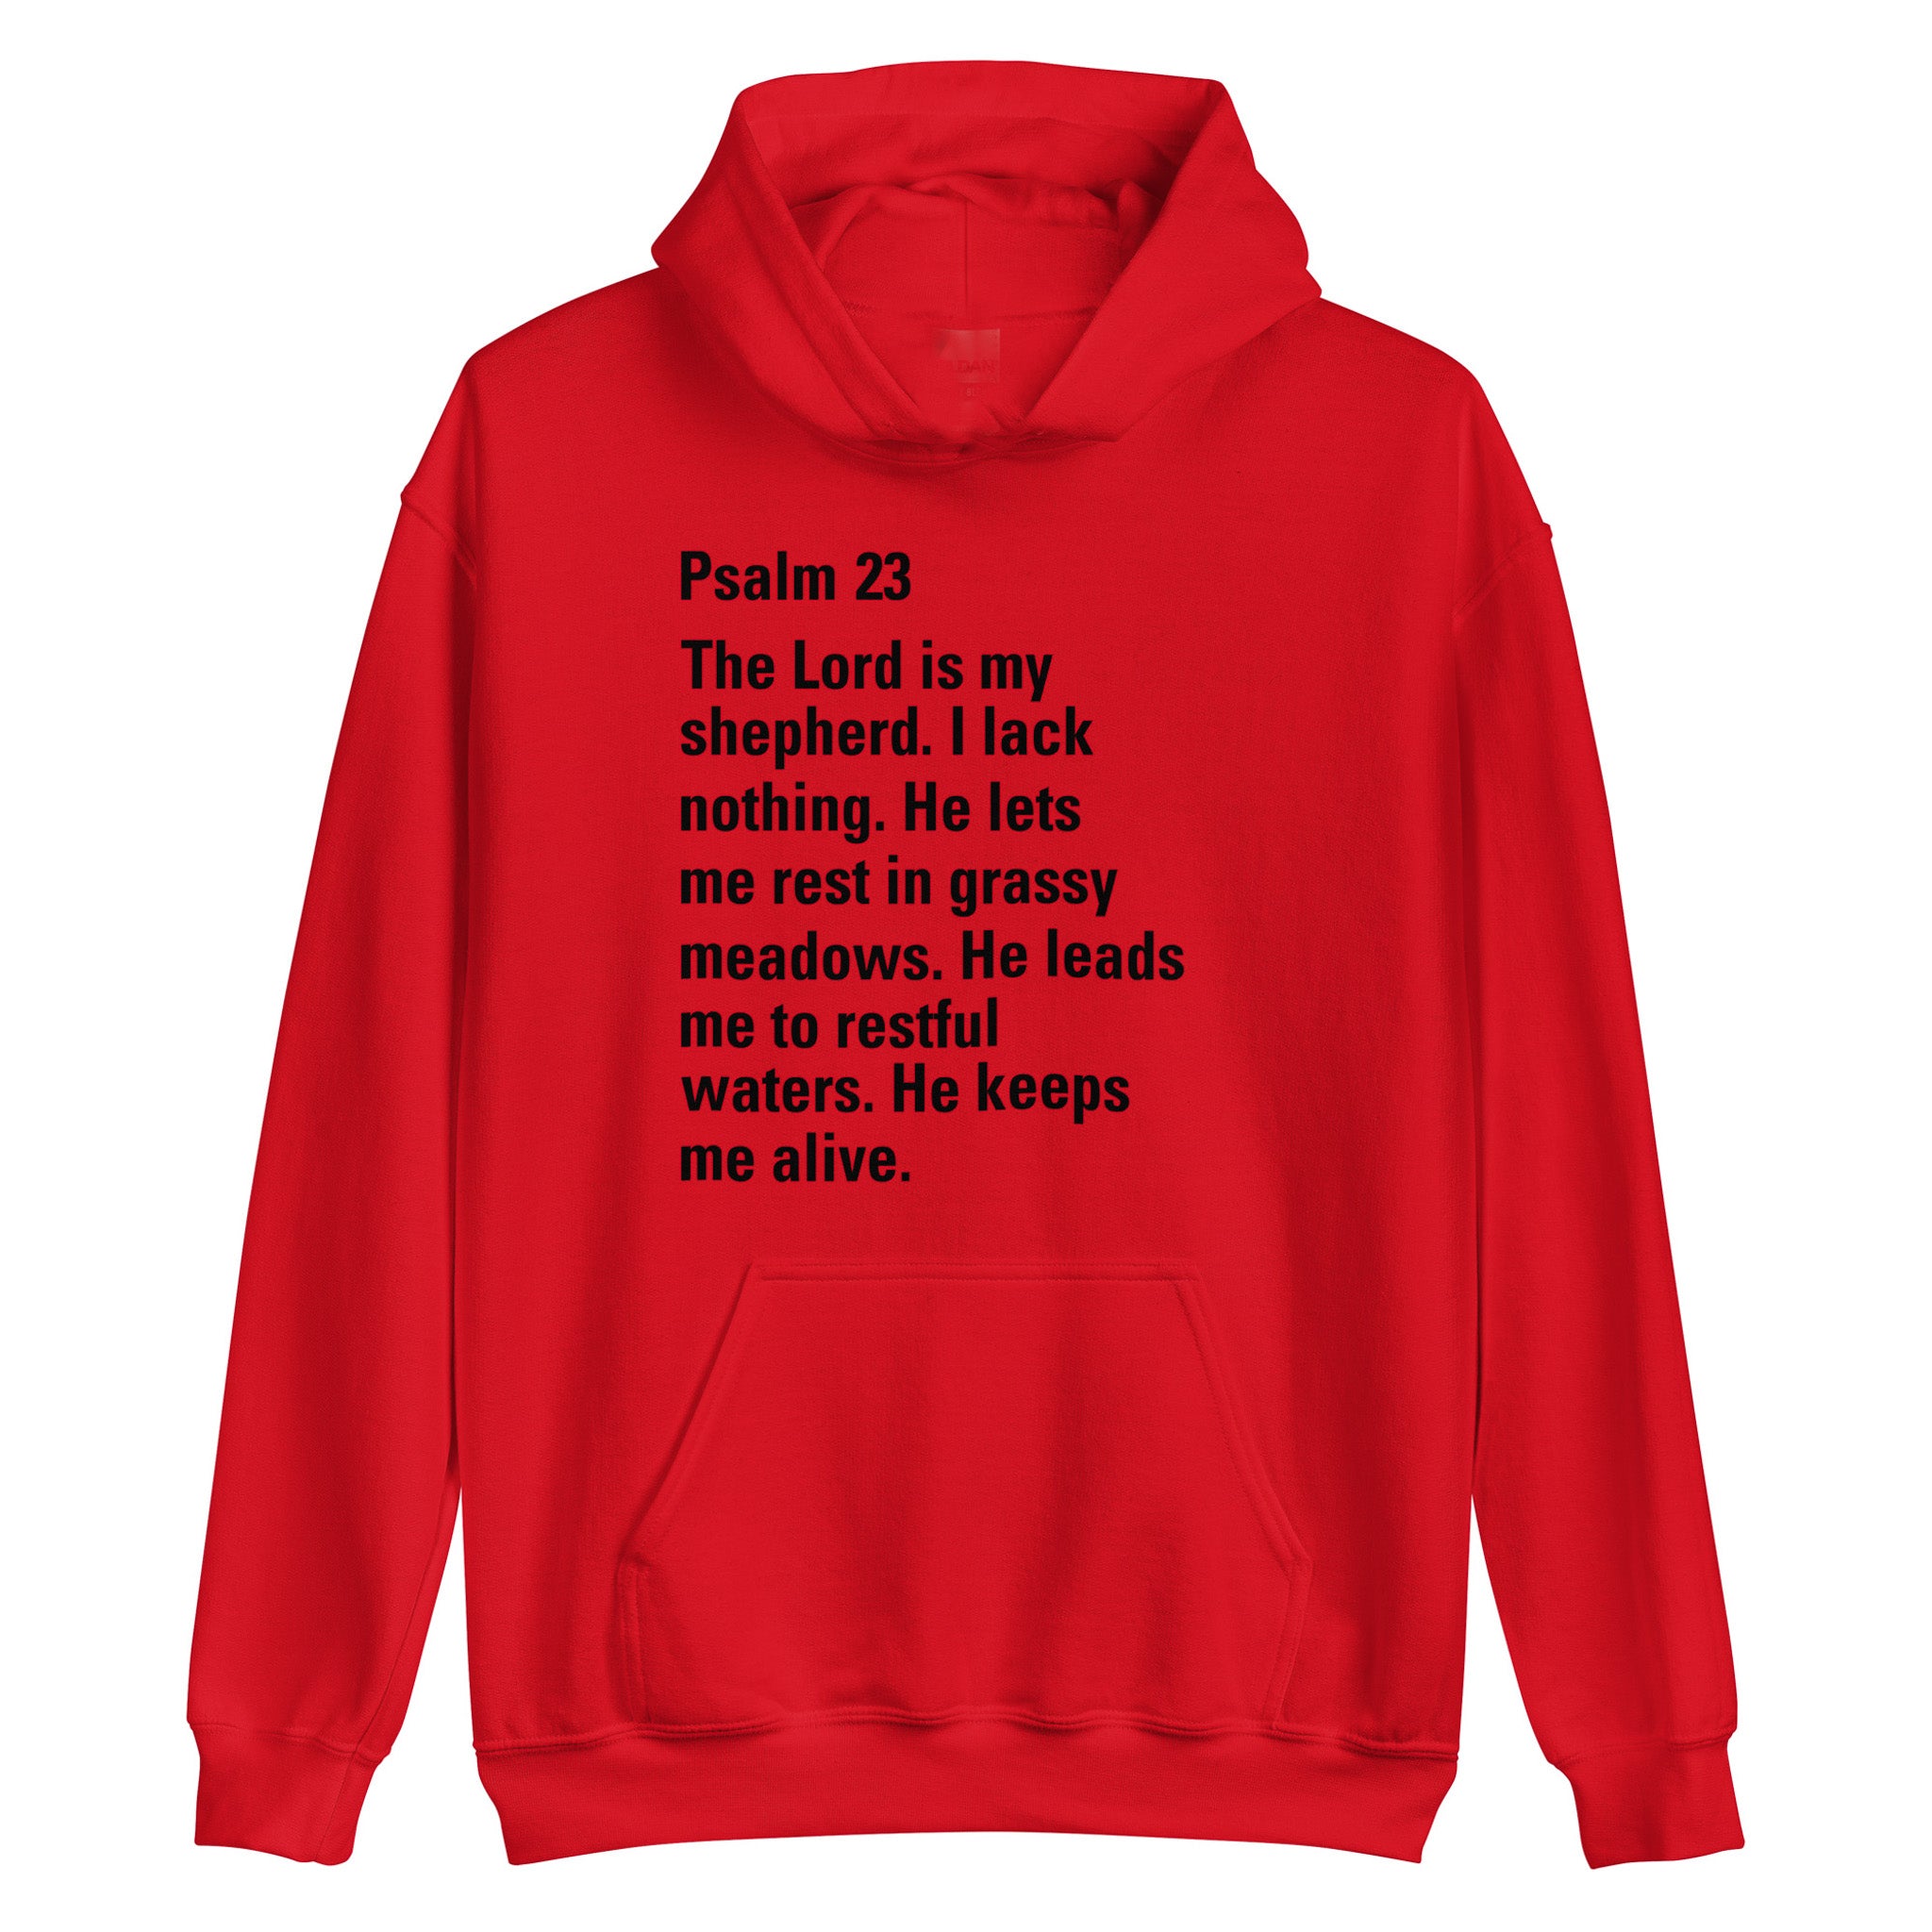 Original Psalm 23 Hoodie, Used By God, Used By God Clothing, Christian Apparel, Christian Hoodies, Christian Clothing, Christian Shirts, God Shirts, Christian Sweatshirts, God Clothing, Jesus Hoodie, christian clothing t shirts, Jesus Clothes, t-shirts about jesus, hoodies near me, Christian Tshirts, God Is Dope, Art Of Homage, Red Letter Clothing, Elevated Faith, Active Faith Sports, Beacon Threads, God The Father Apparel